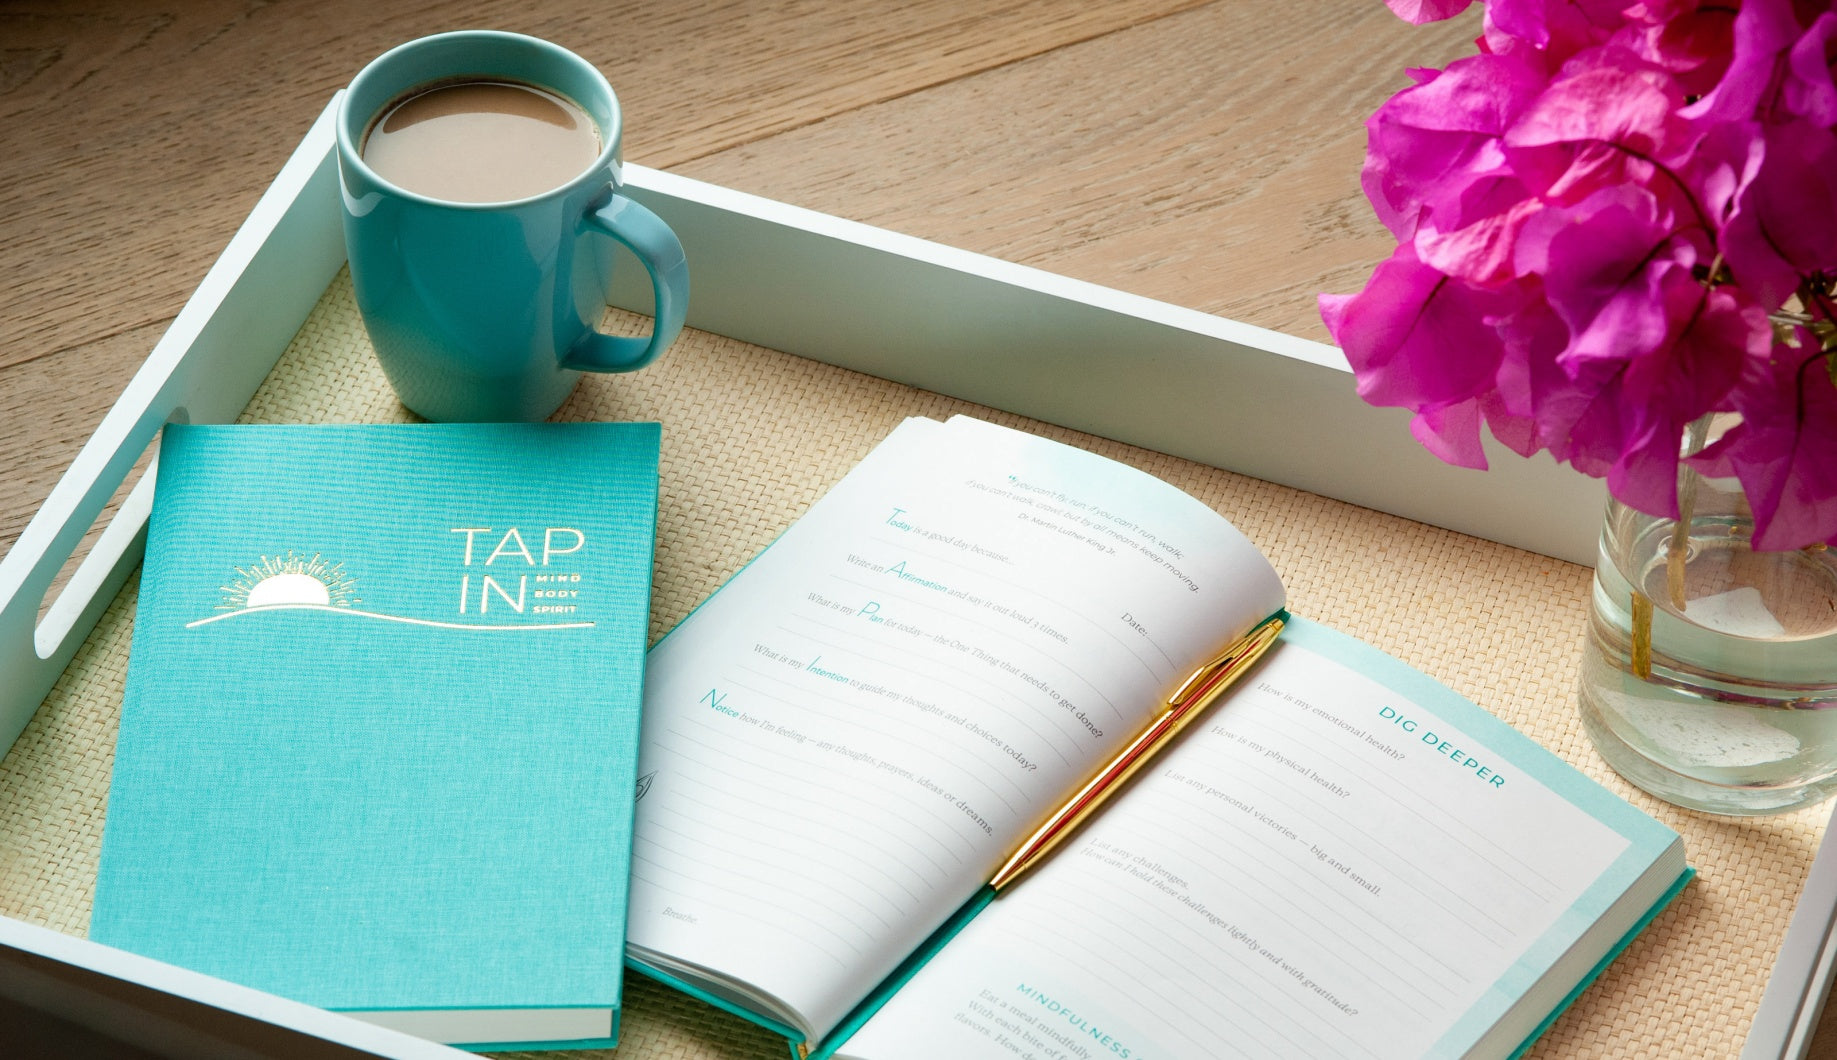 TAP IN wellness journal seafoam blue linen cover and open pages with teal illustrations.